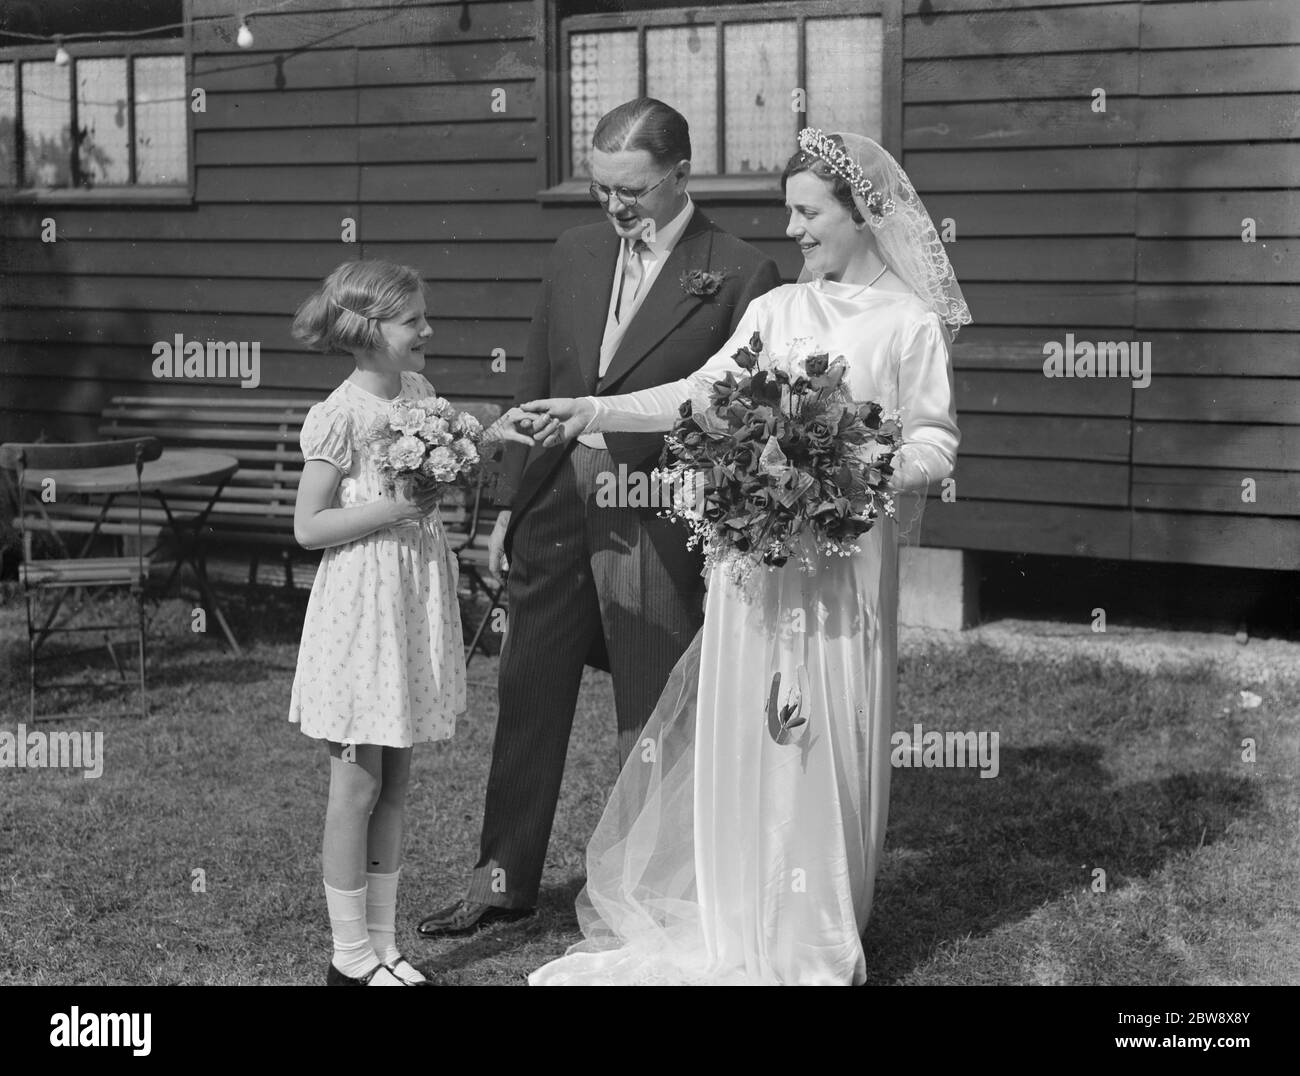 The wedding of Massey and Dunk . Stood with a young member of their guests . 1936 Stock Photo